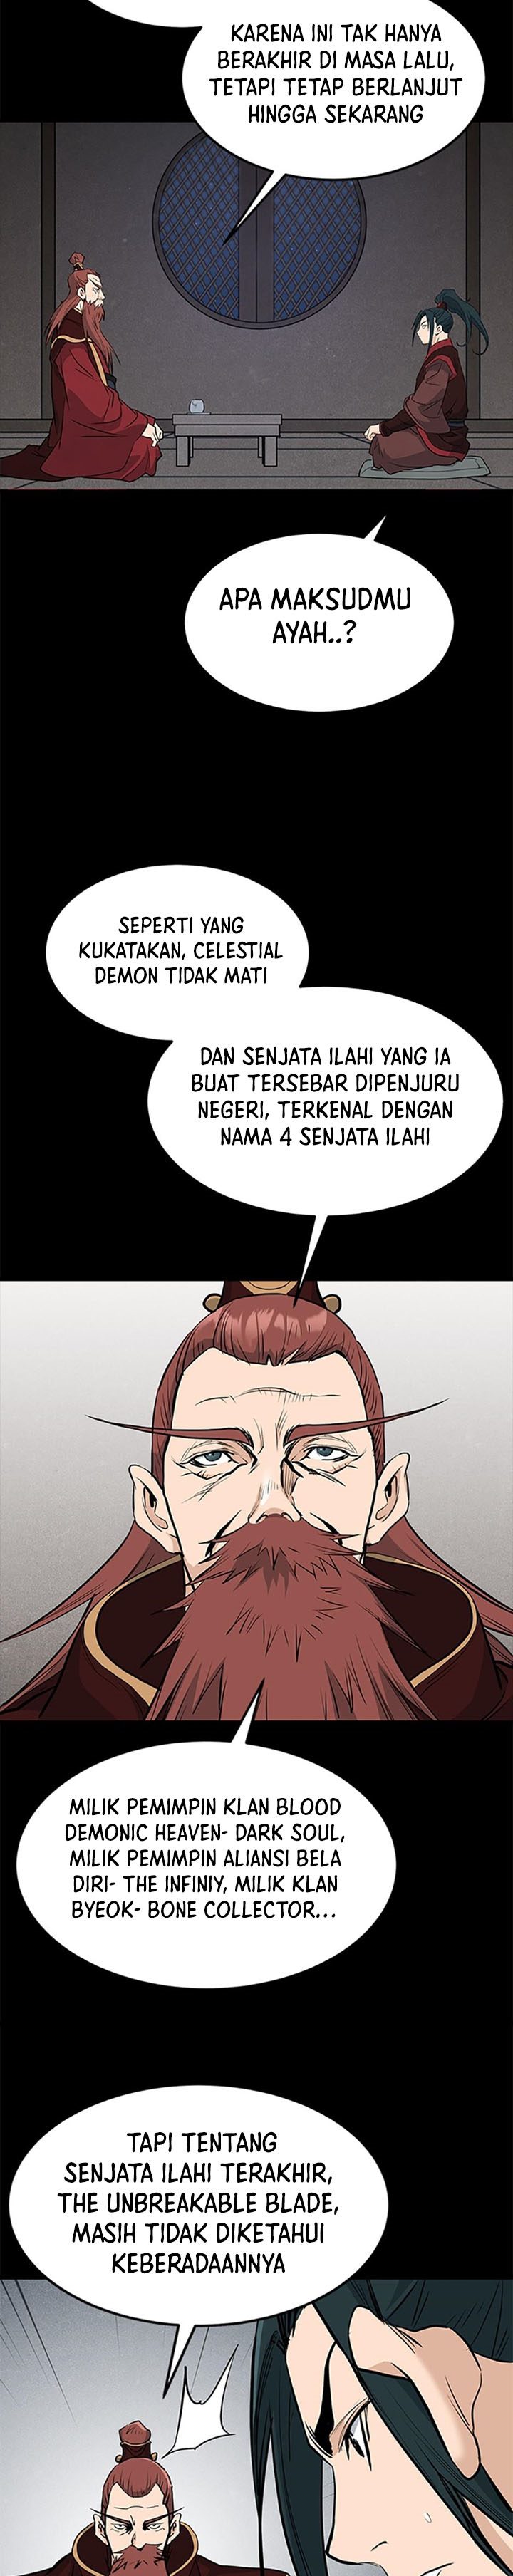 Grand General Chapter 65